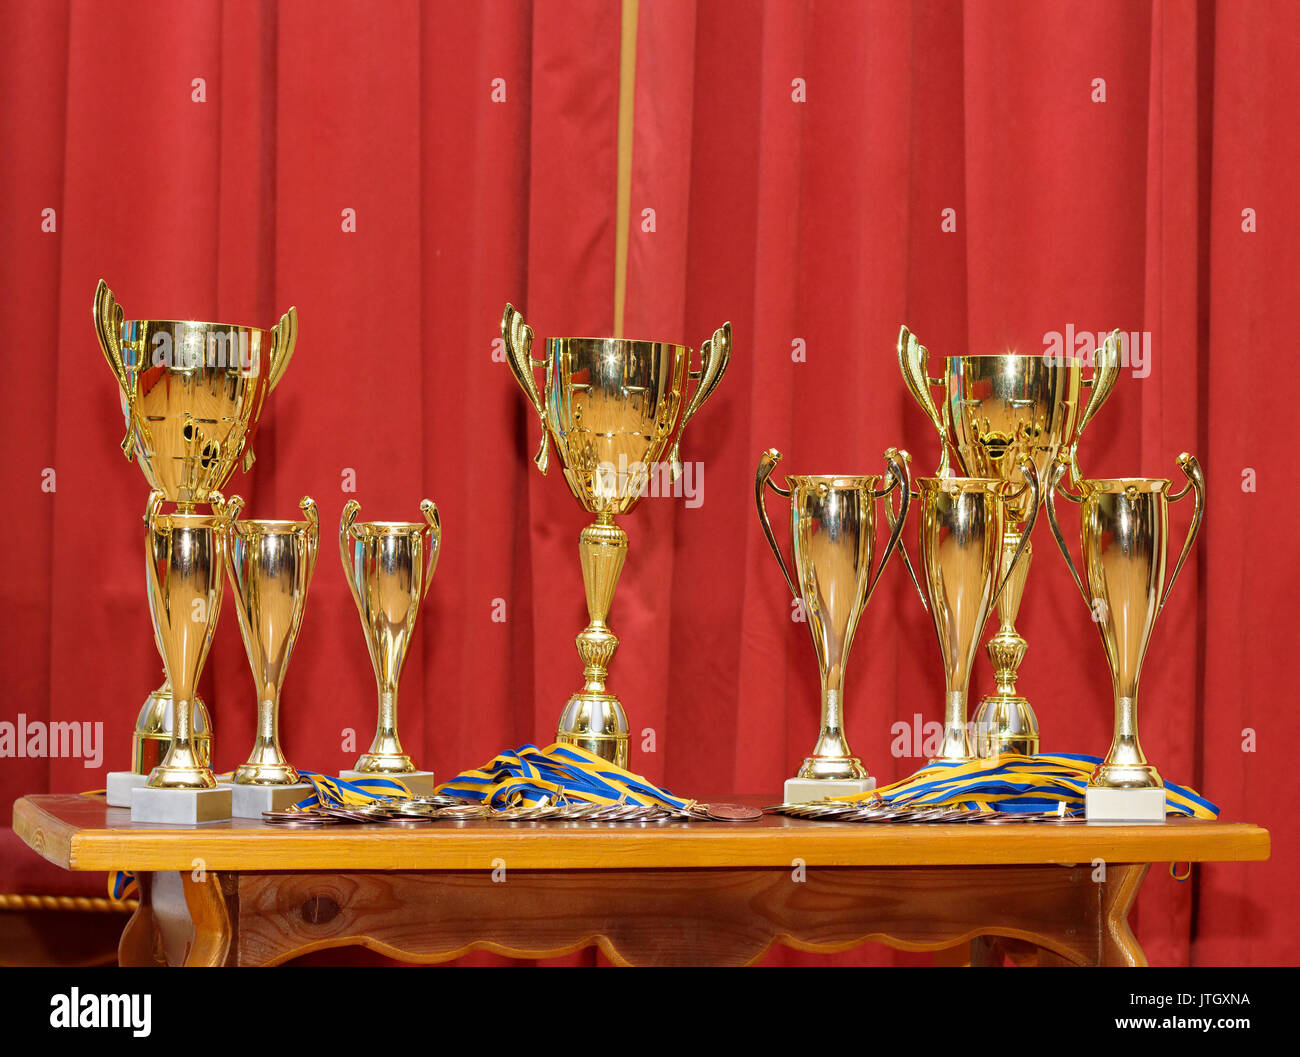 Many golden award cups waiting for their winners Stock Photo